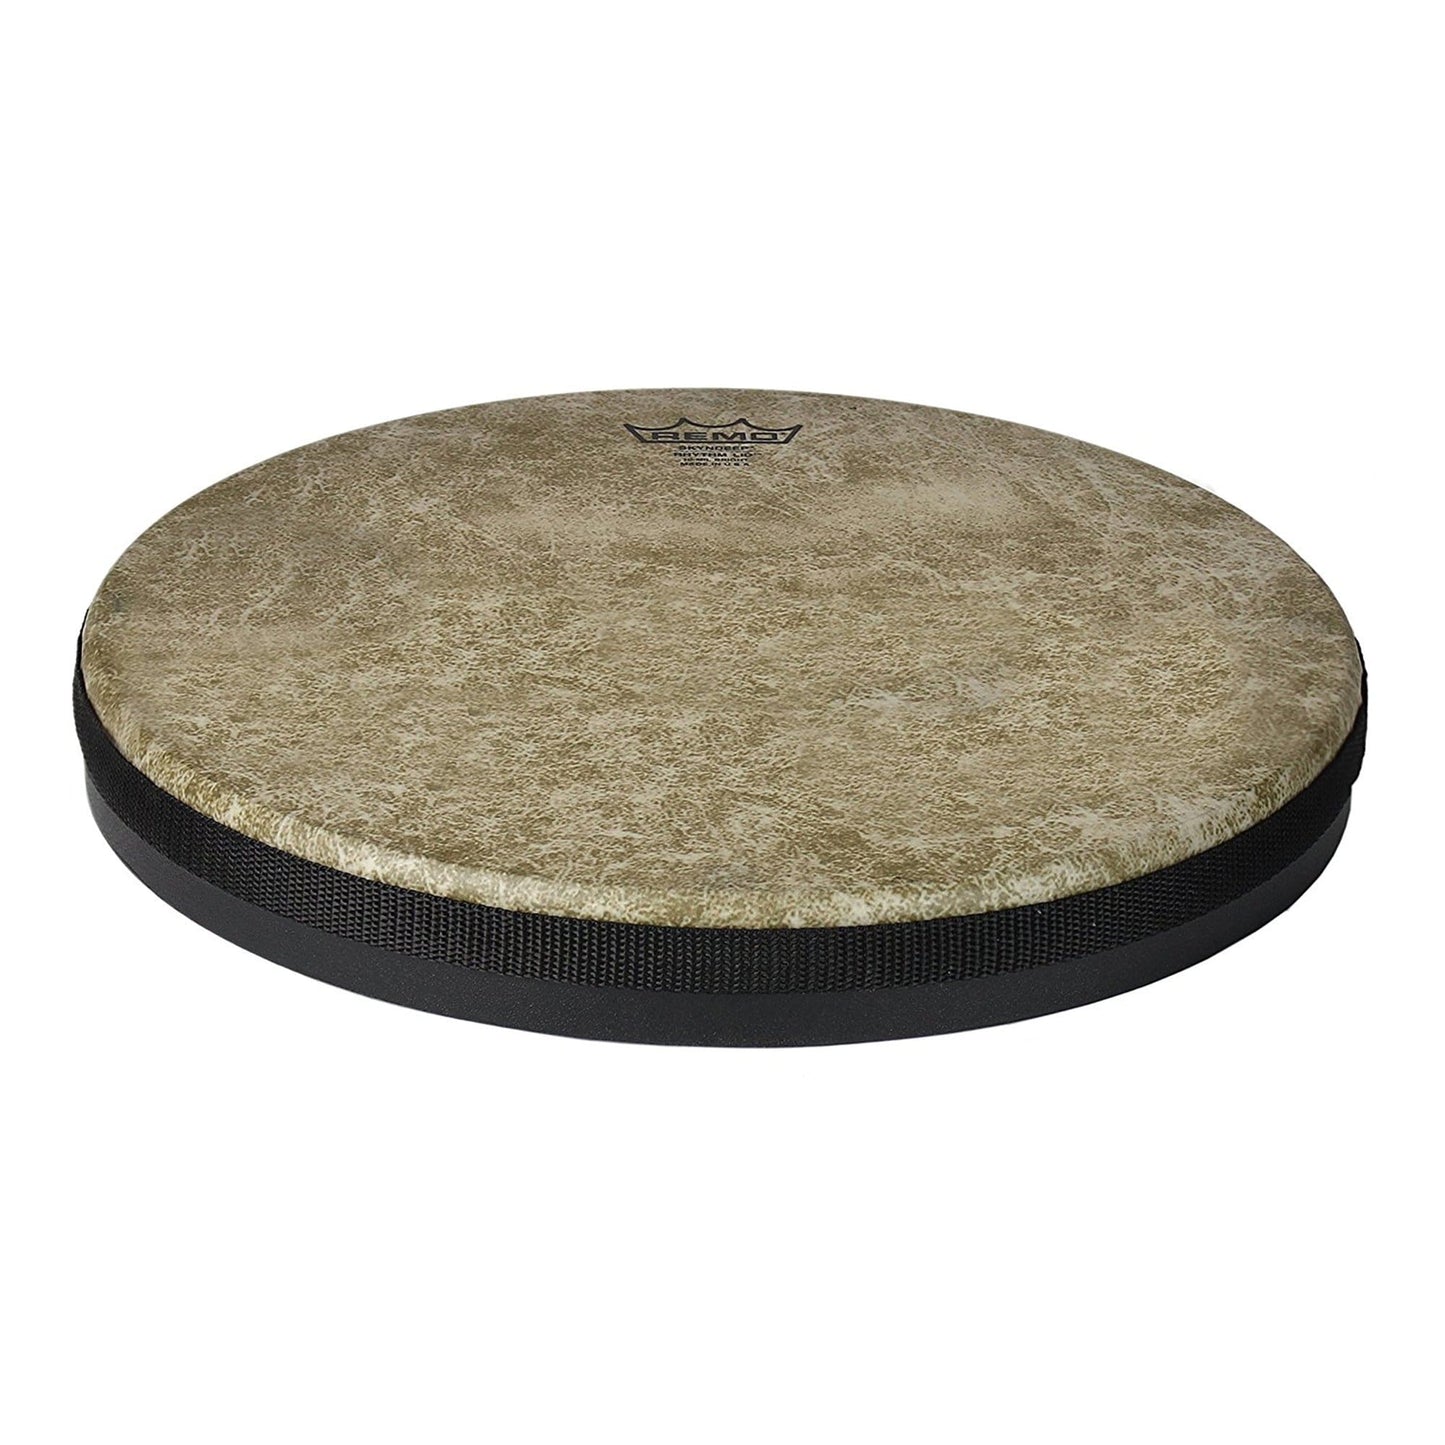 Remo 13x1.5 Rhythm Lid Beige Skyndeep Fiberskyn 10mm Drums and Percussion / Parts and Accessories / Heads